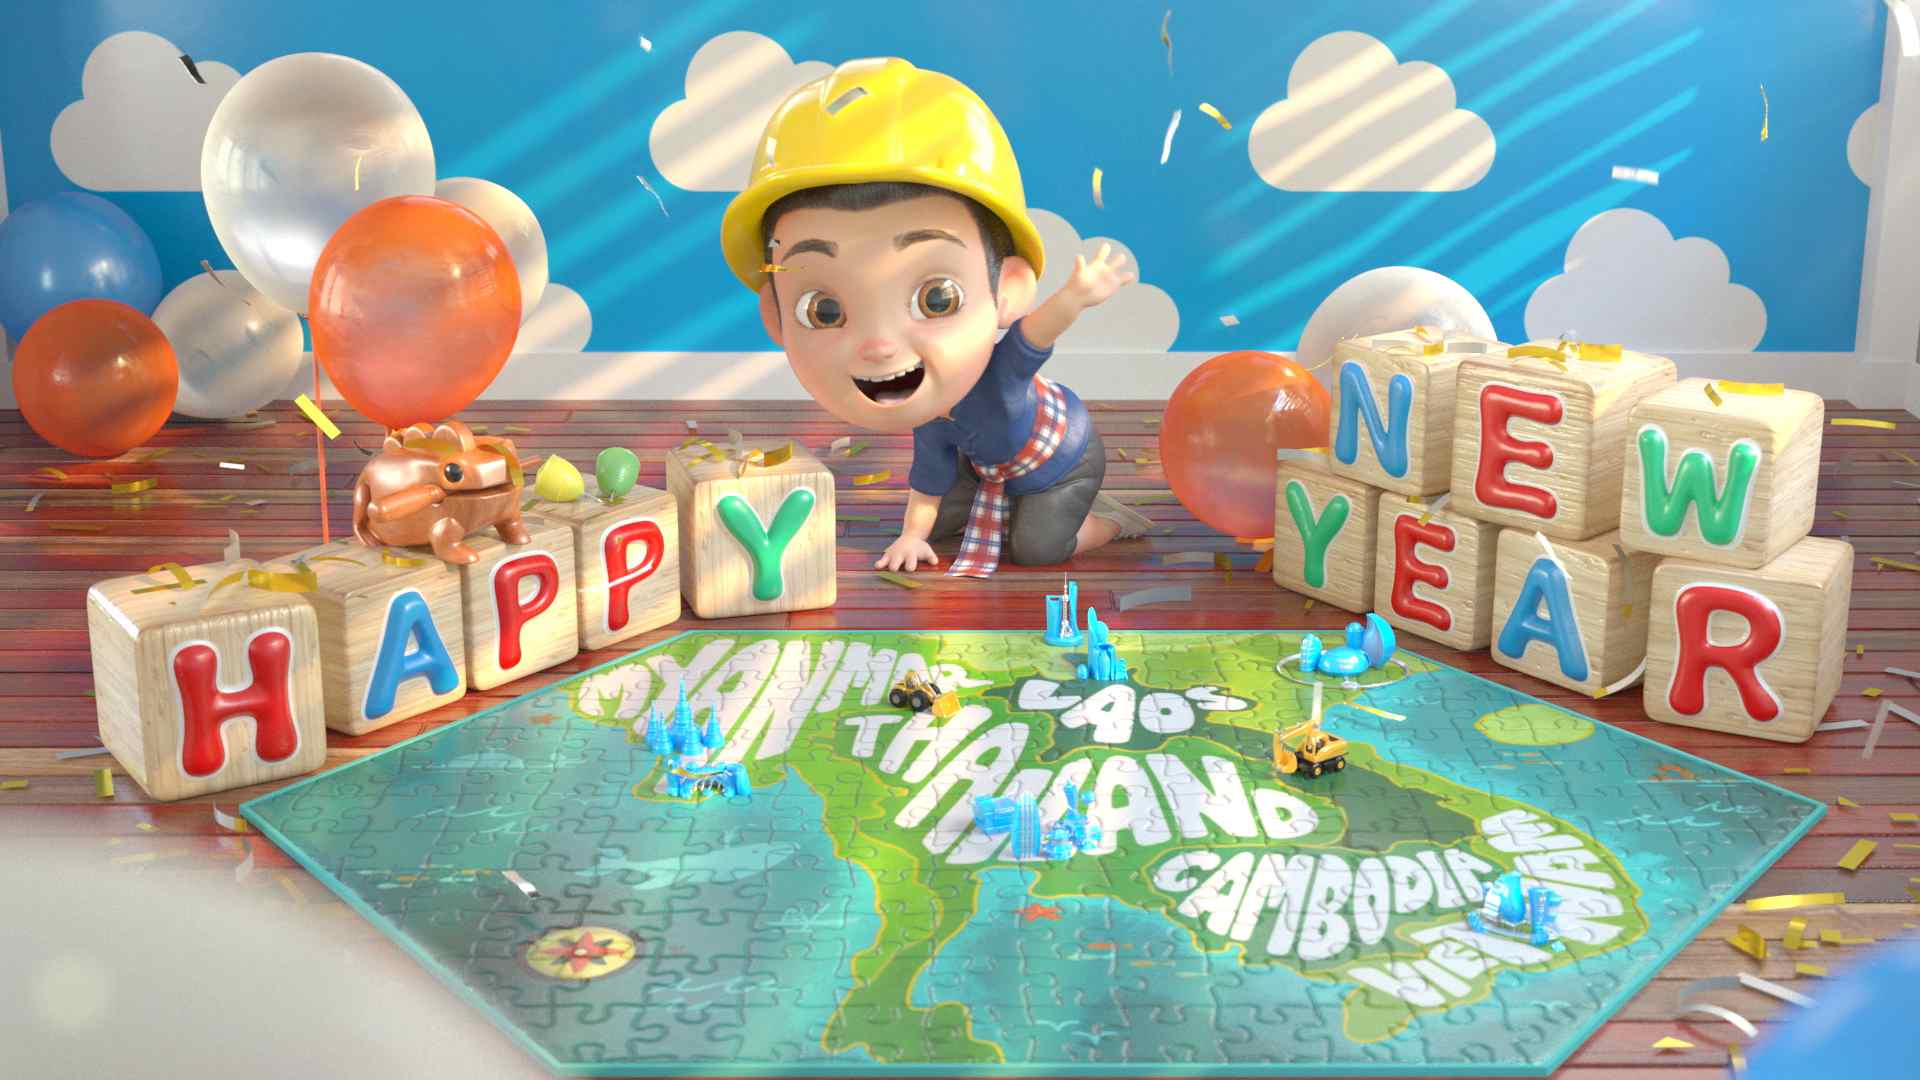 3D playroom animation, happy new year